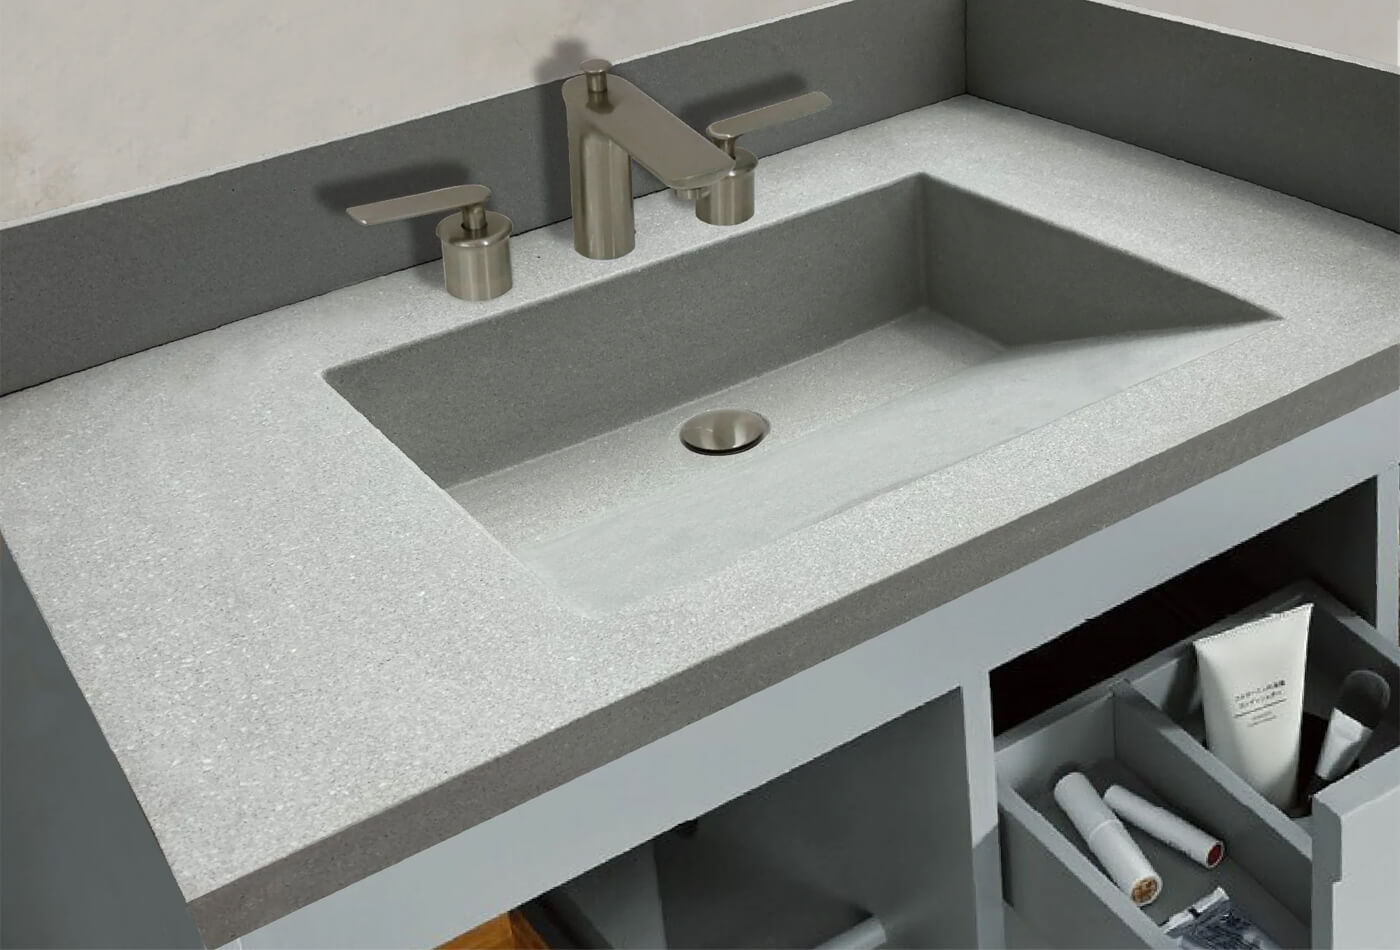 Stone Ramp Sink - Solution For Easy Drain